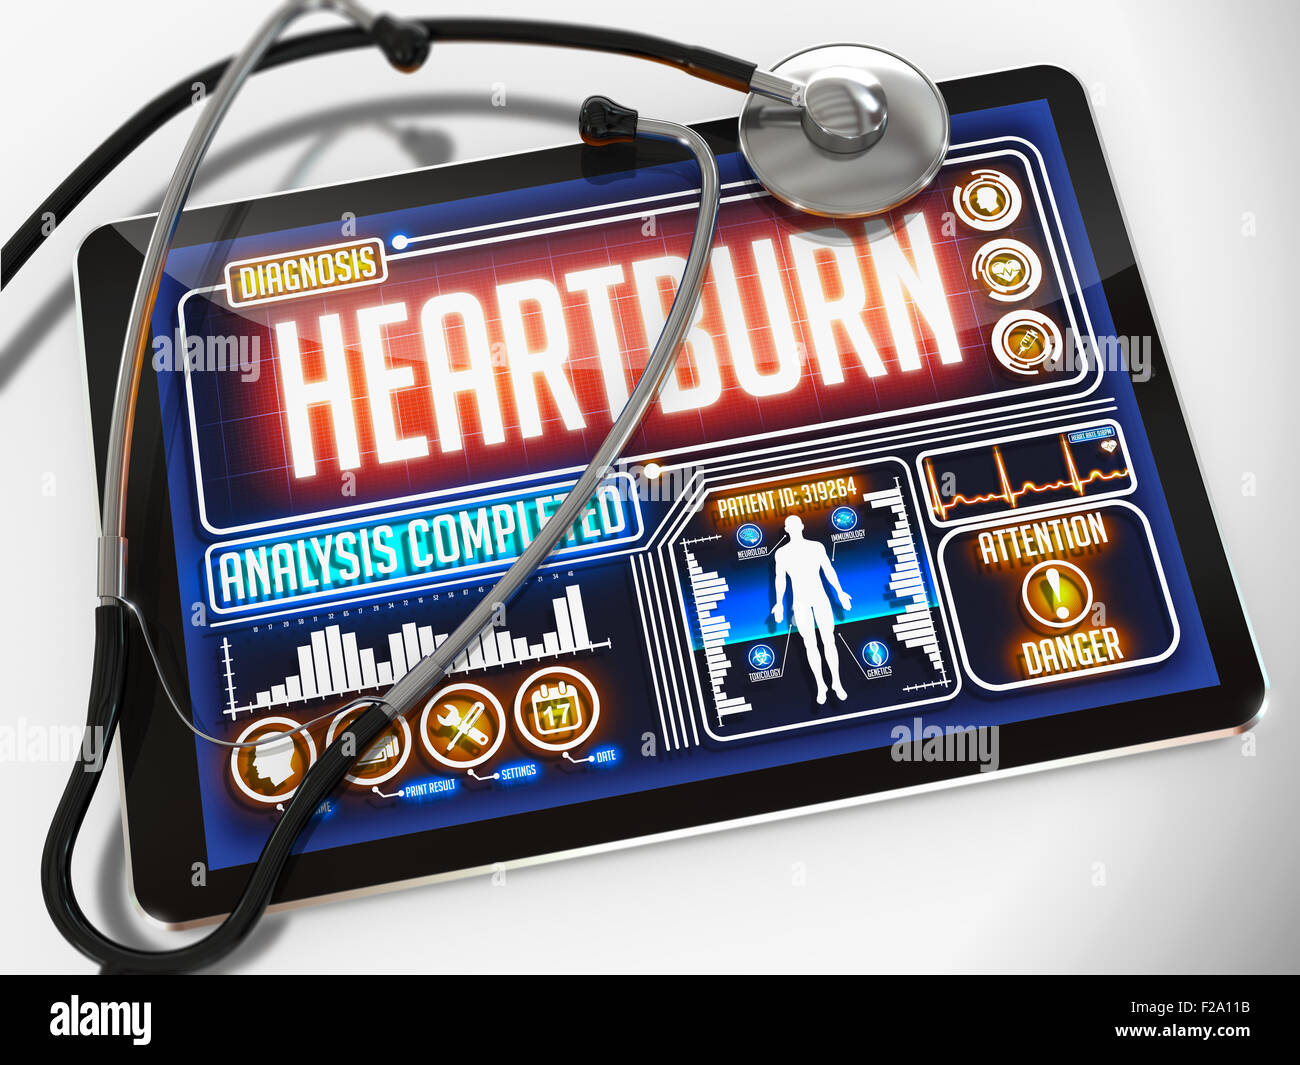 Heartburn on the Display of Medical Tablet. Stock Photo